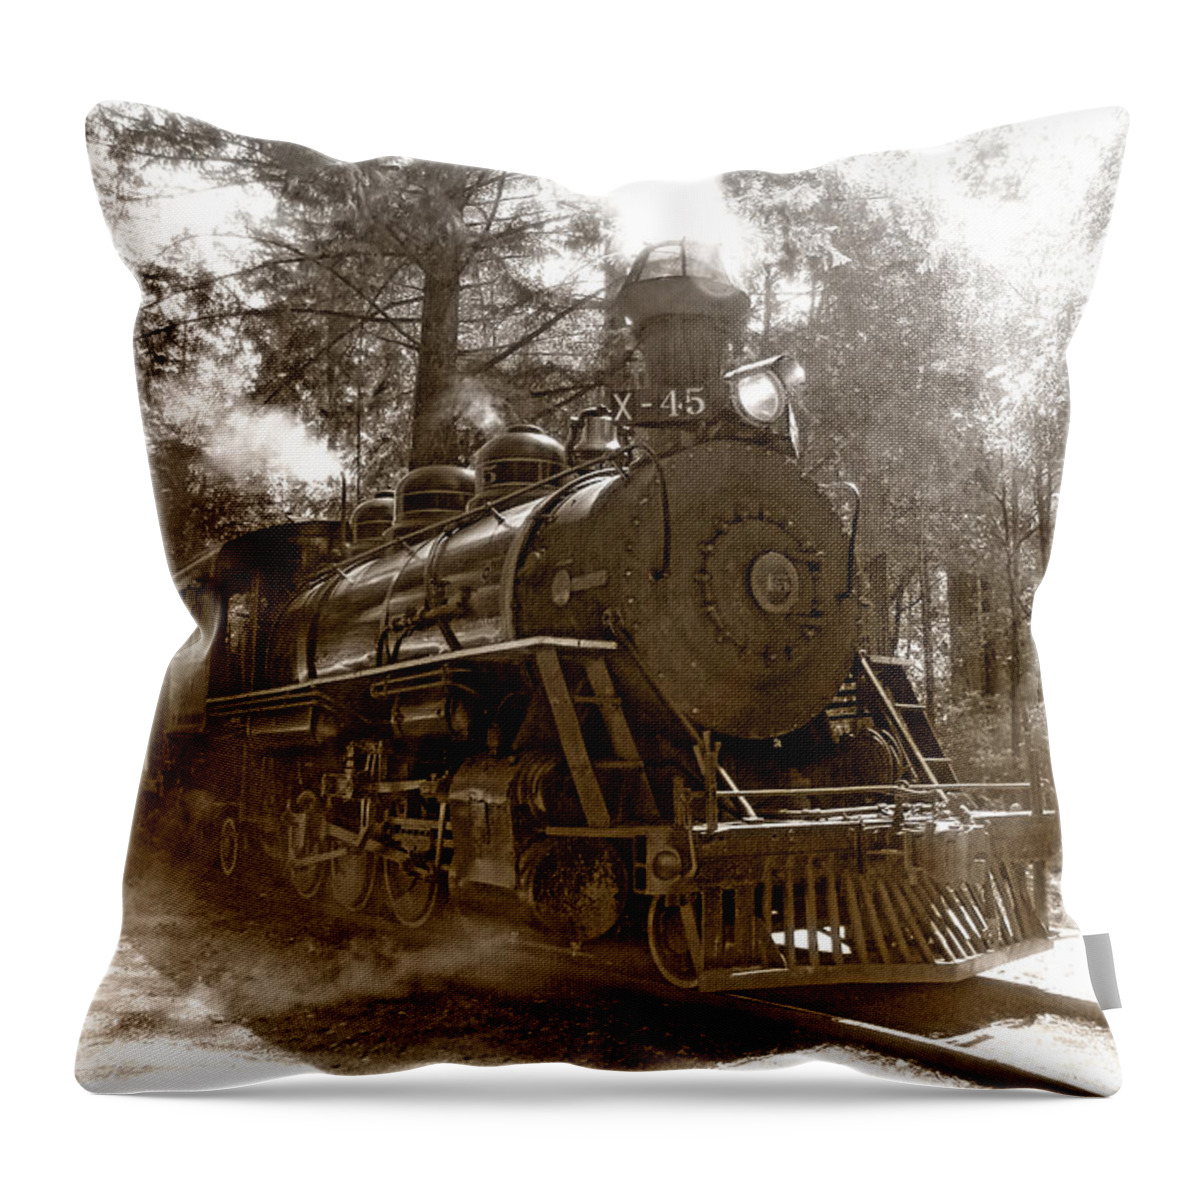 Locomotive Throw Pillow featuring the photograph Time Traveler by Donna Blackhall